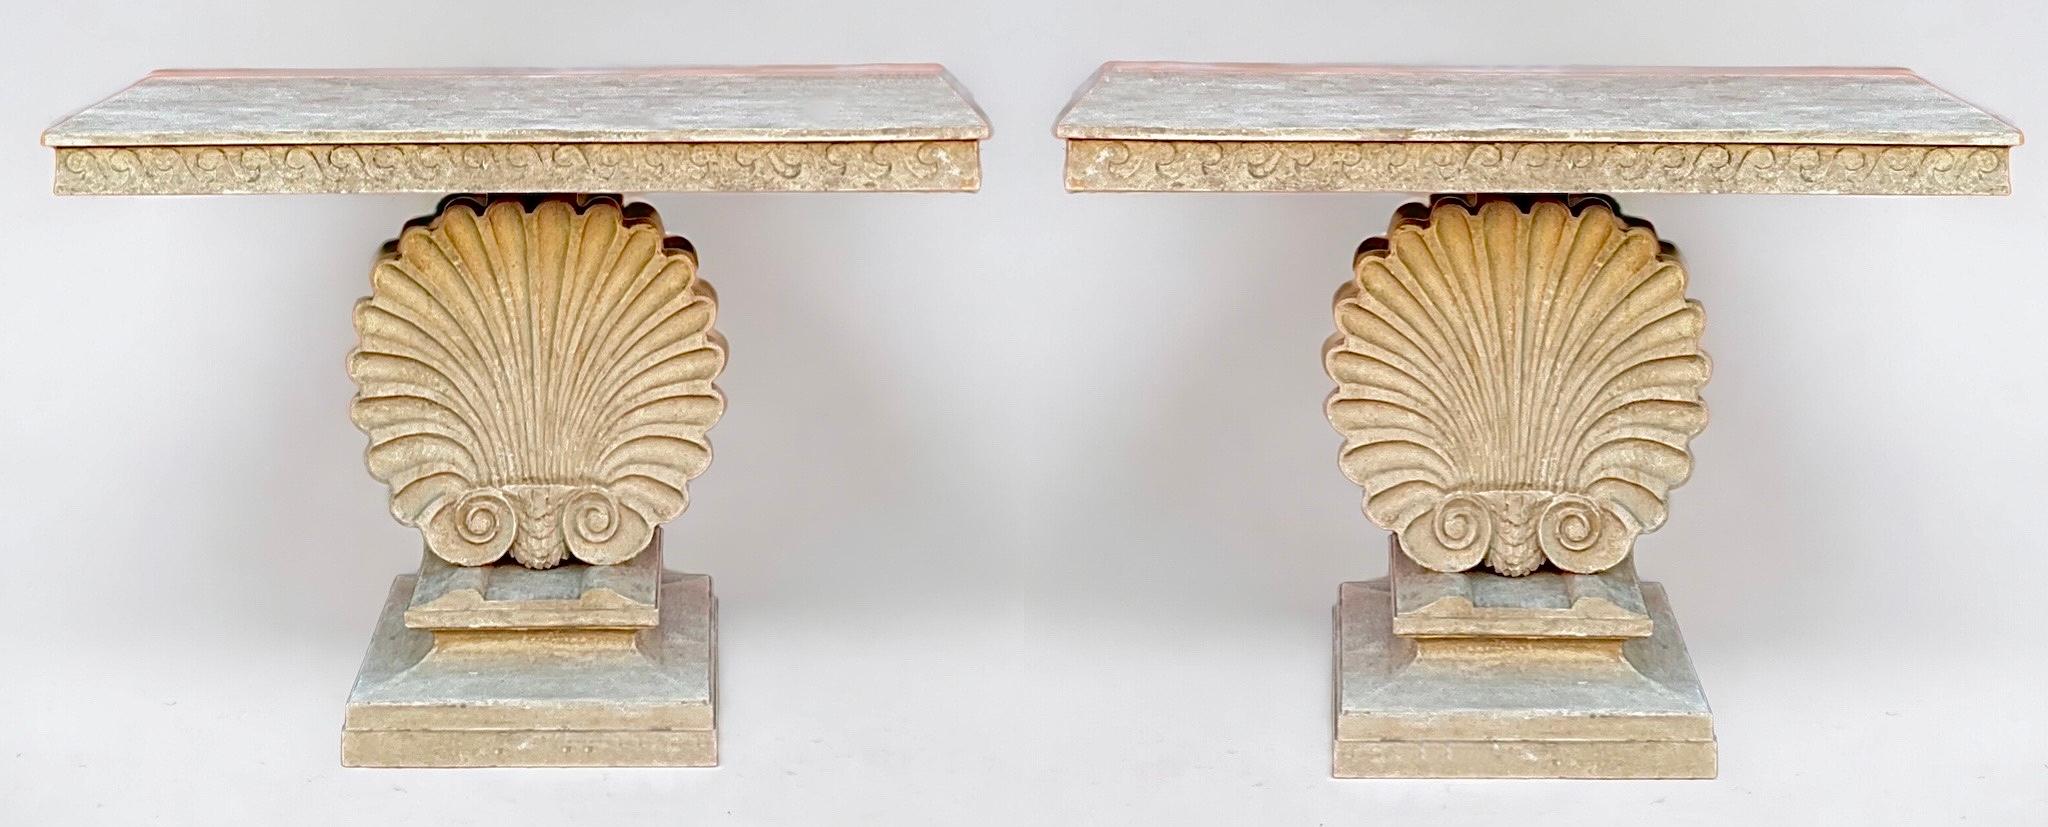 Regency Style Carved Shell Form Console Table Styled After Wormley / Dunbar -2 For Sale 1